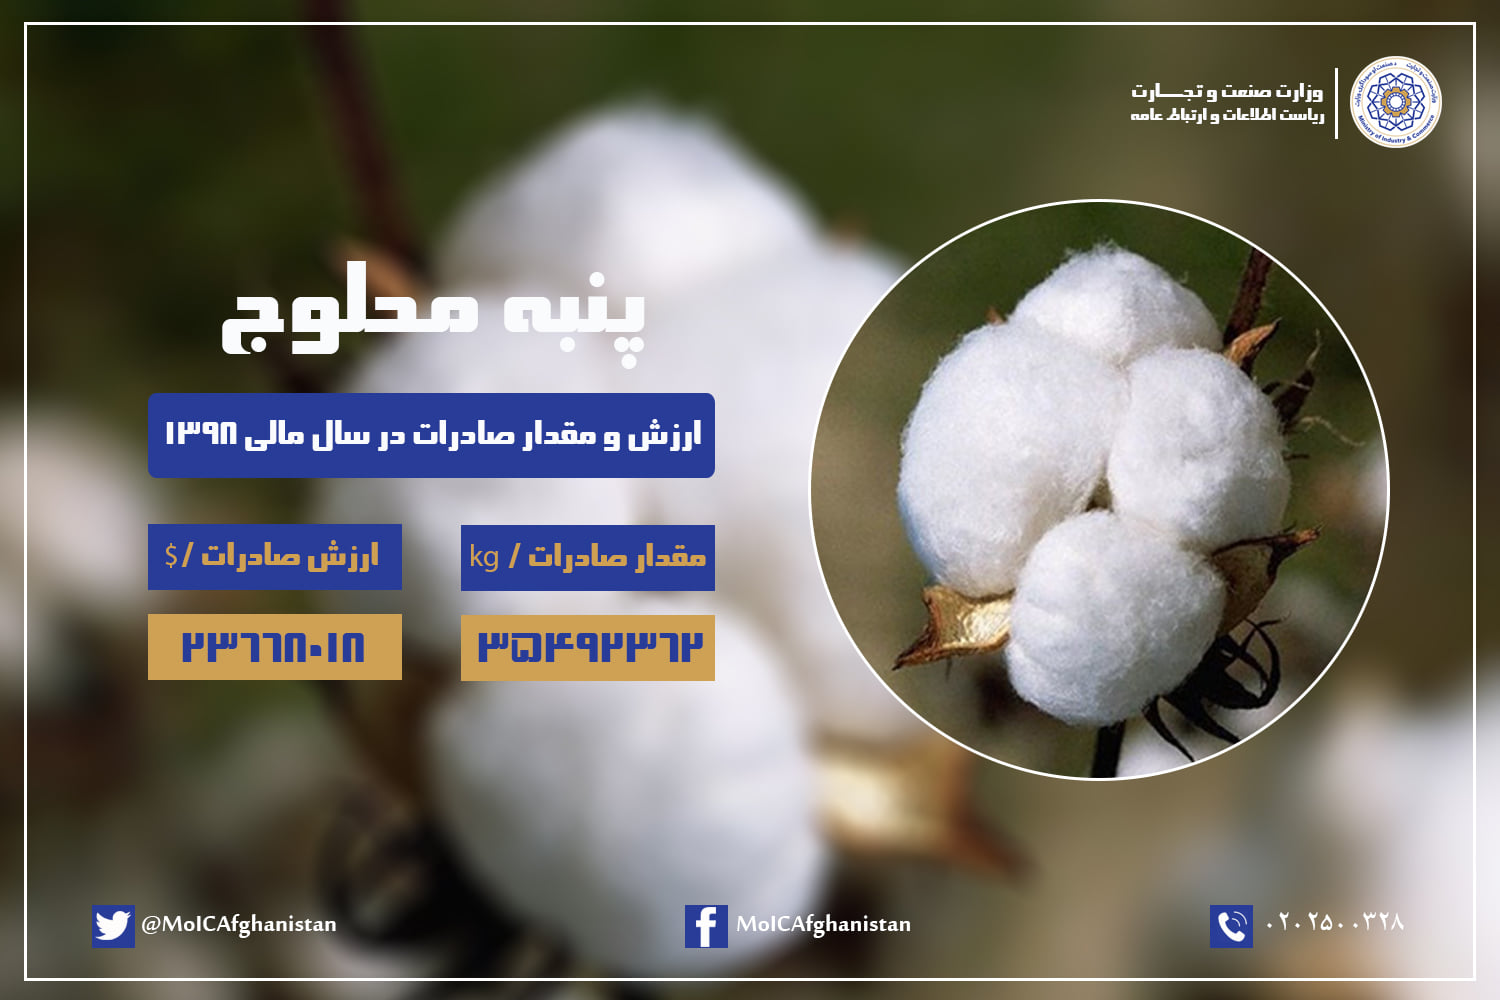 Value and Amount of Cotton exports in the fiscal year 1398